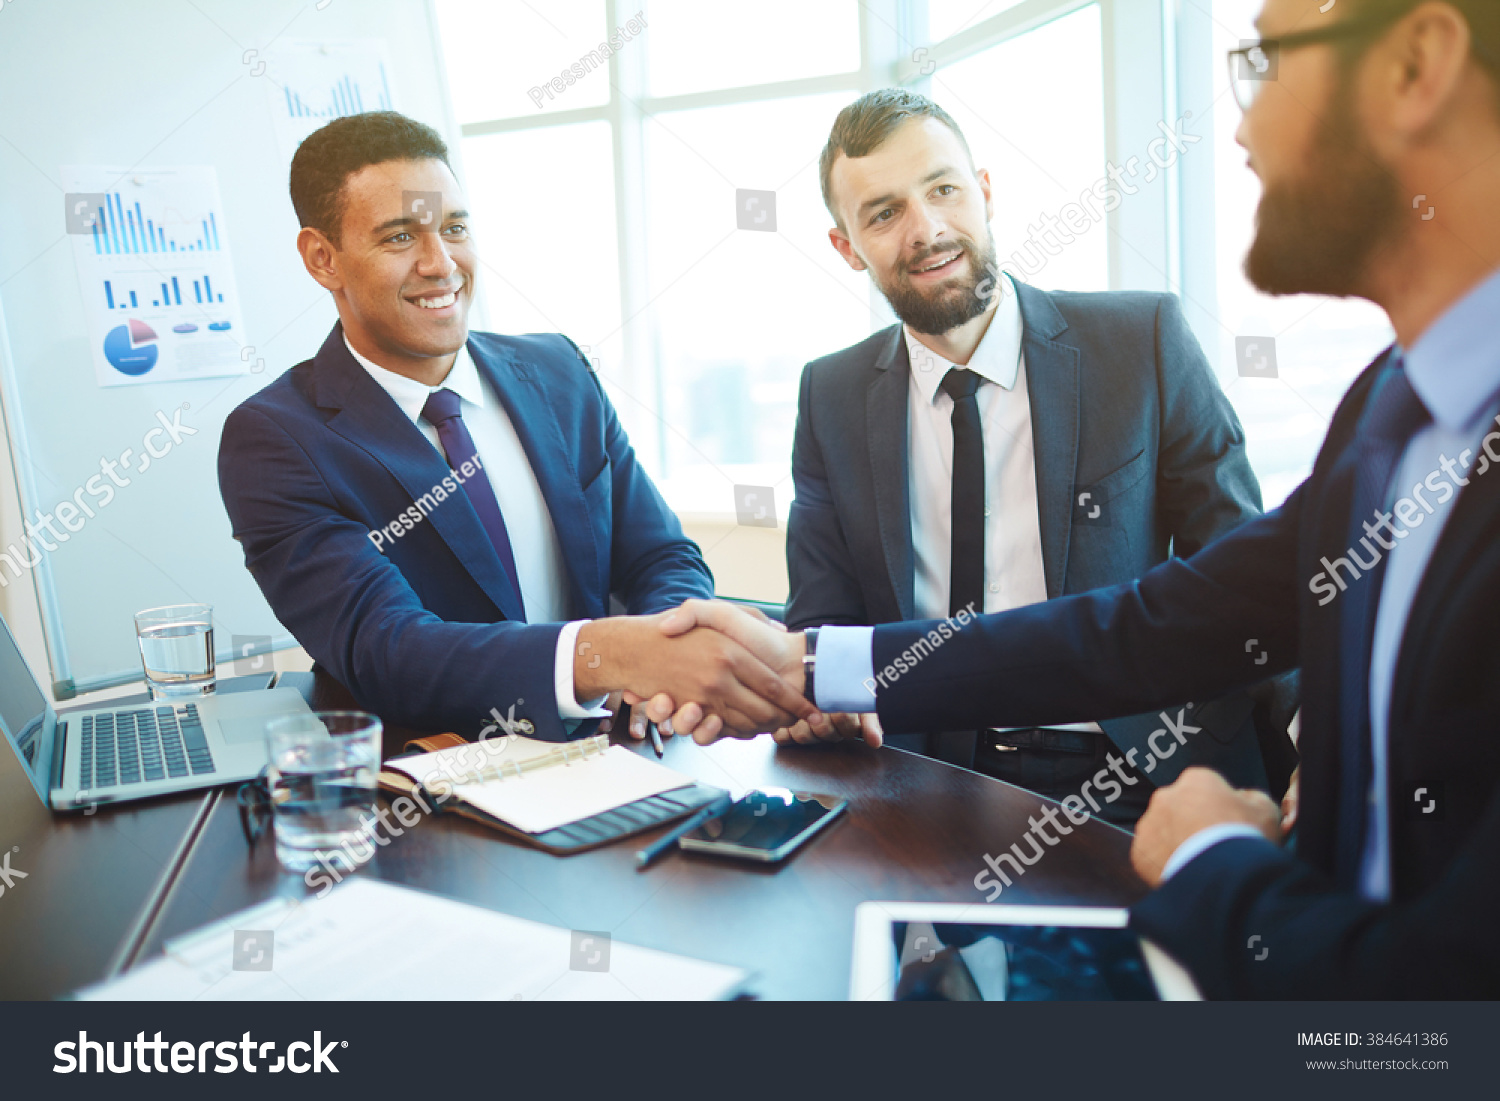 Businessmen shaking hands during a meeting #384641386